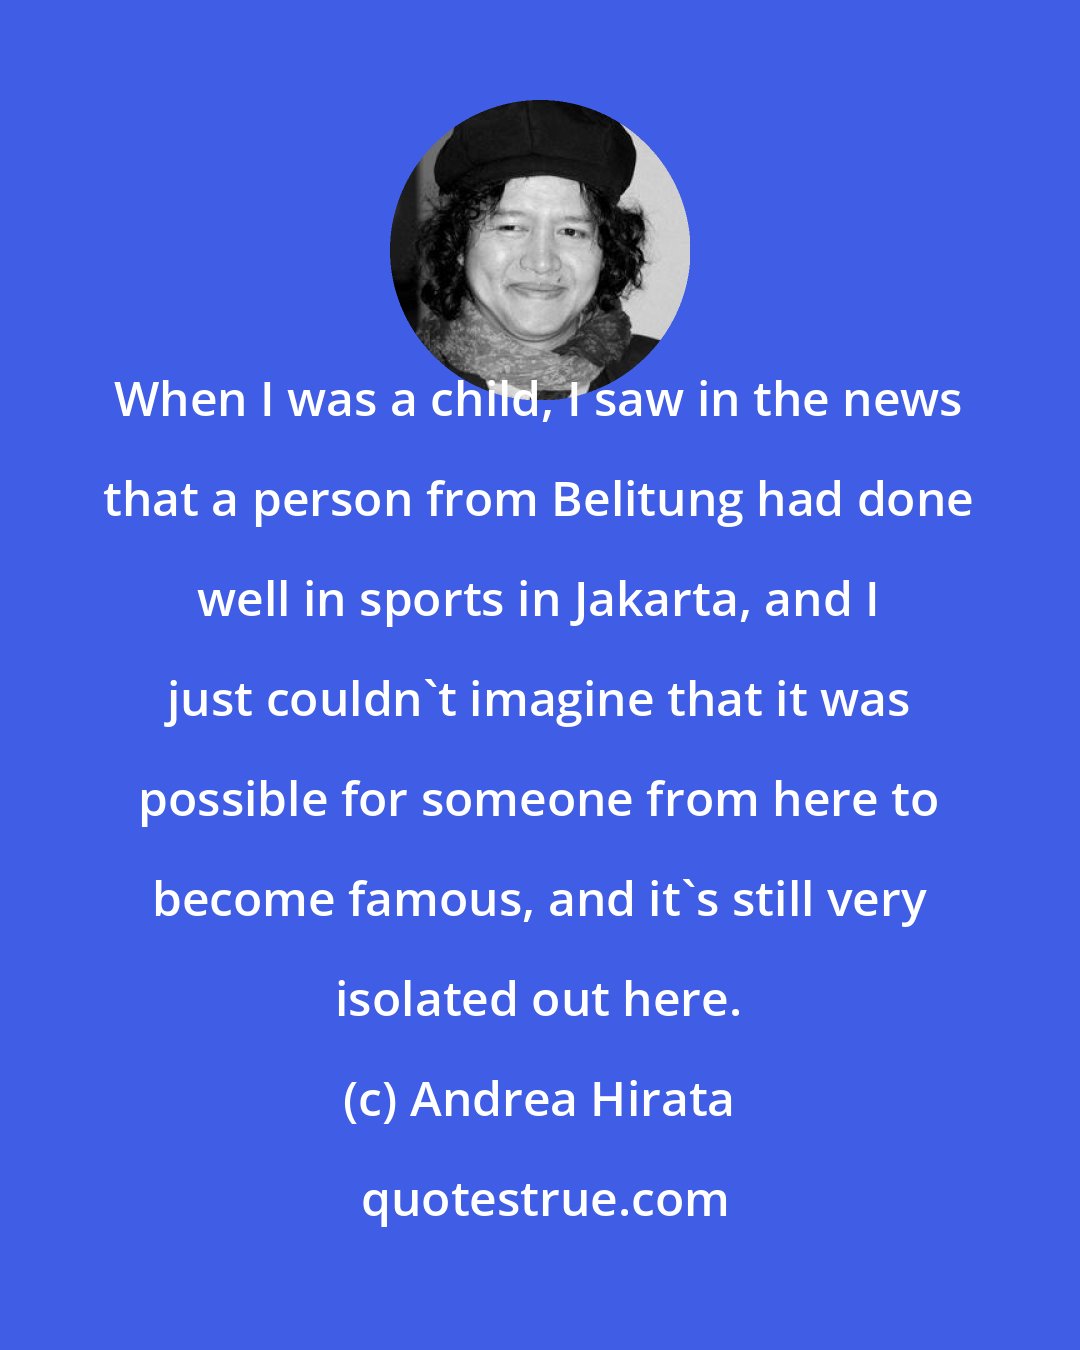 Andrea Hirata: When I was a child, I saw in the news that a person from Belitung had done well in sports in Jakarta, and I just couldn't imagine that it was possible for someone from here to become famous, and it's still very isolated out here.